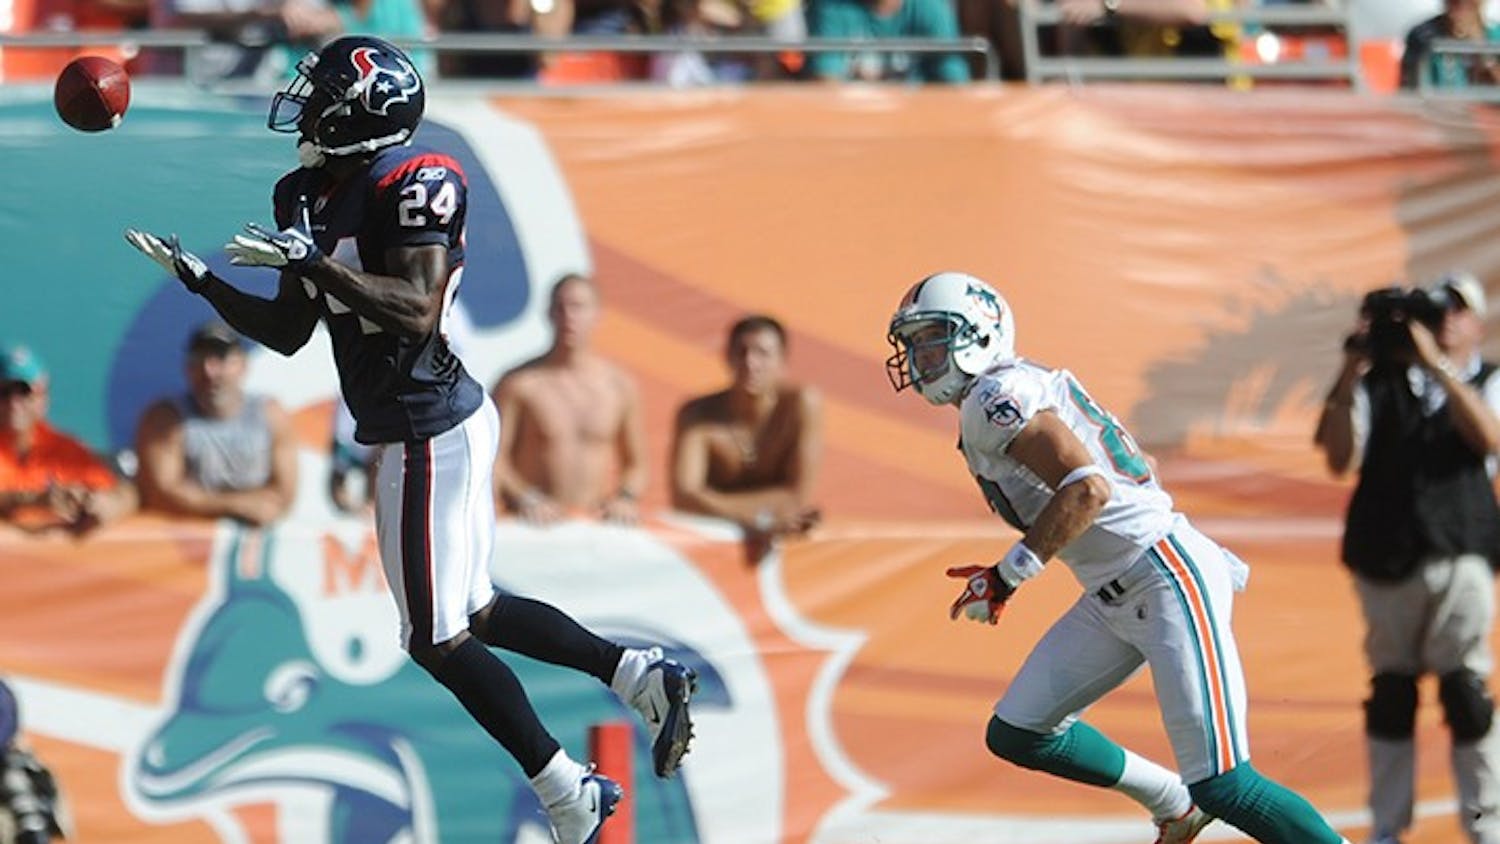 Jonathan Joseph of the Texans intercepts a pass intended for Brian Hartline of the Dolphins. The Houston Texans defeated the Miami Dolphins, 23-13, at Sun Life Stadium in Miami Gardens, Florida, Sunday, September 18, 2011. (Jim Rassol/Sun Sentinel/MCT)